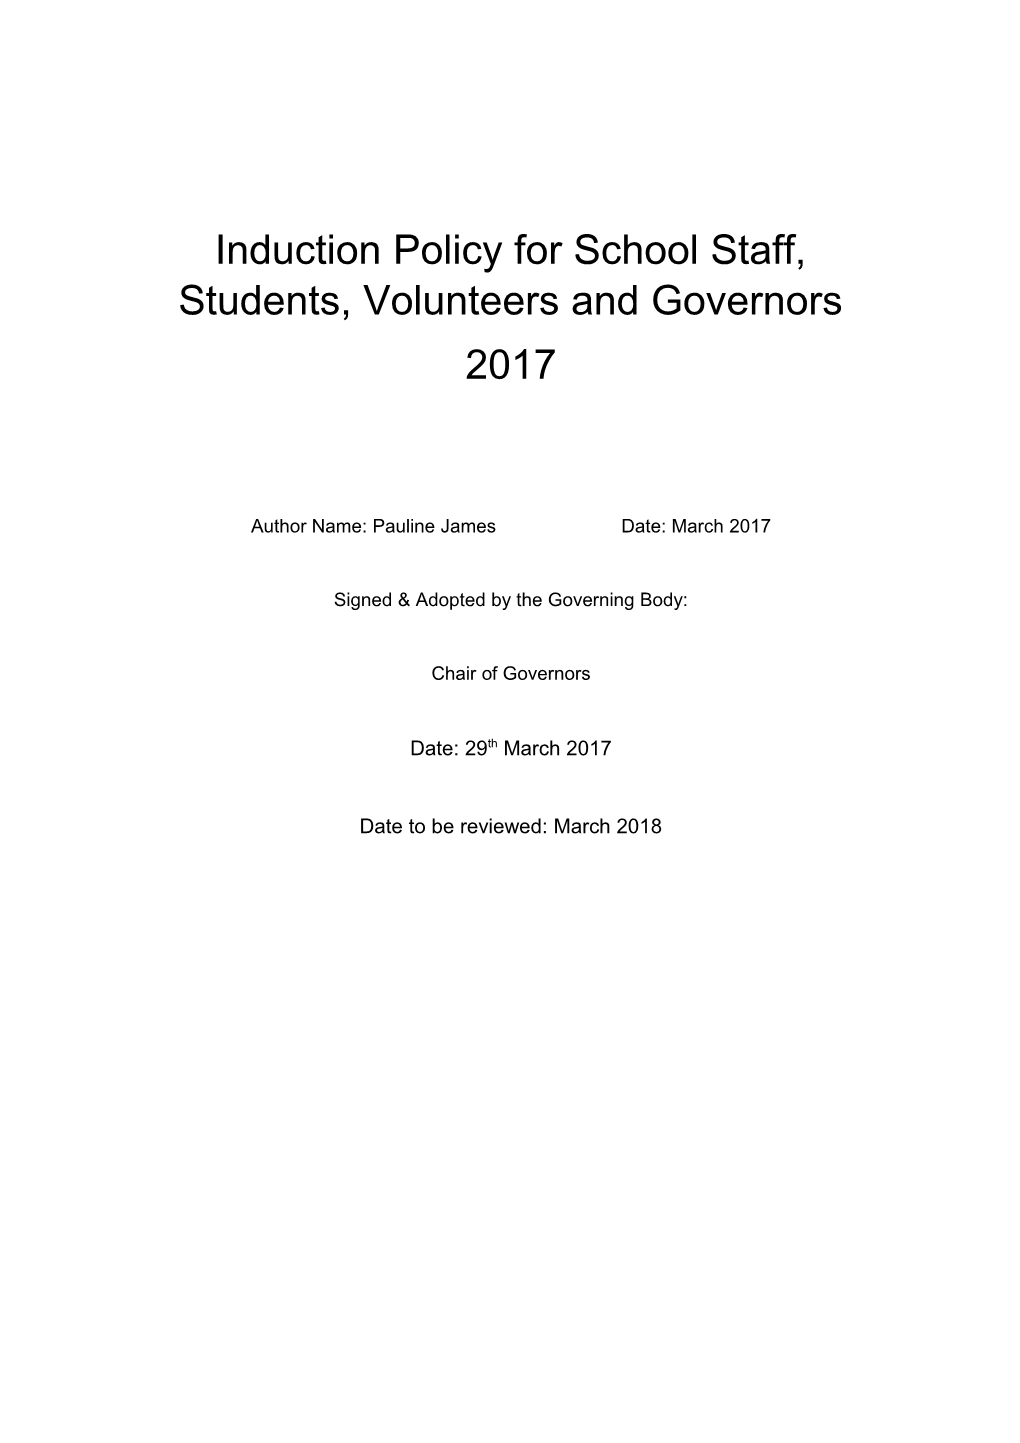 Induction Policy for School Staff, Students, Volunteers and Governors